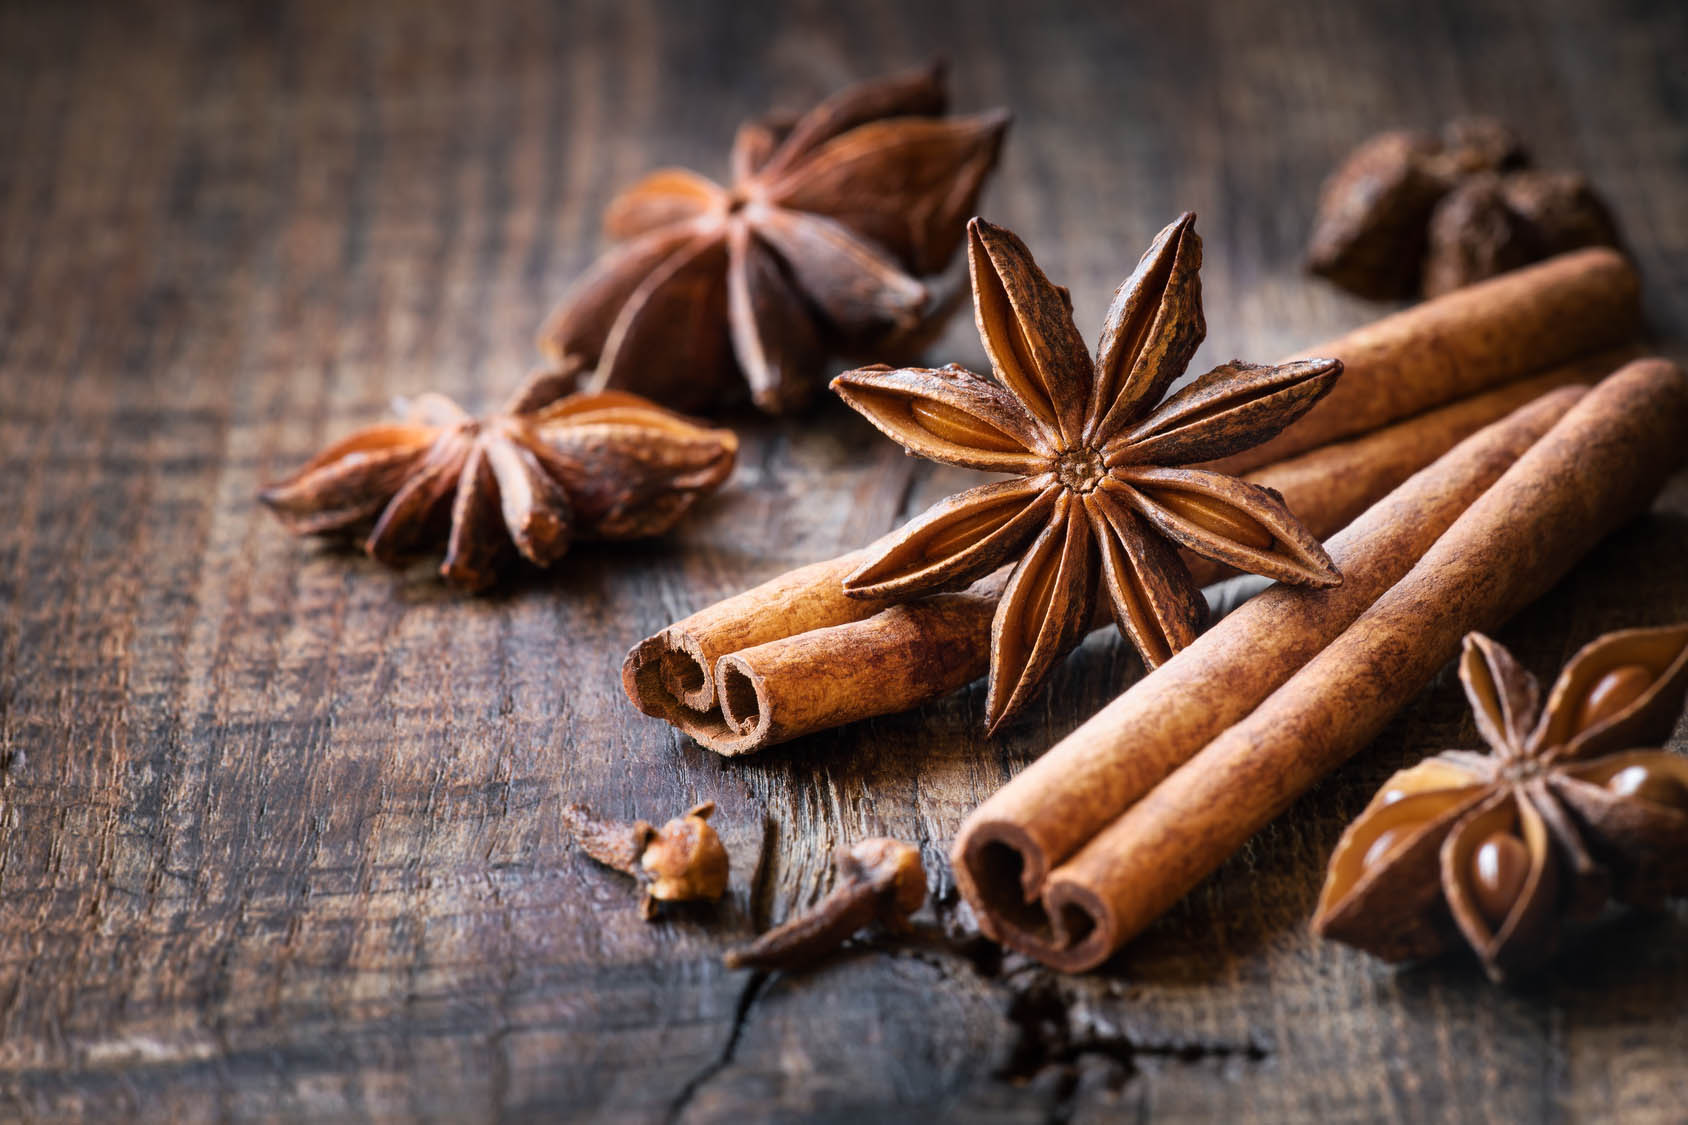 Dried star anise and cinnamon sticks on wooden surface. Gourmet Spice Company, Wholesale Food Distributor.